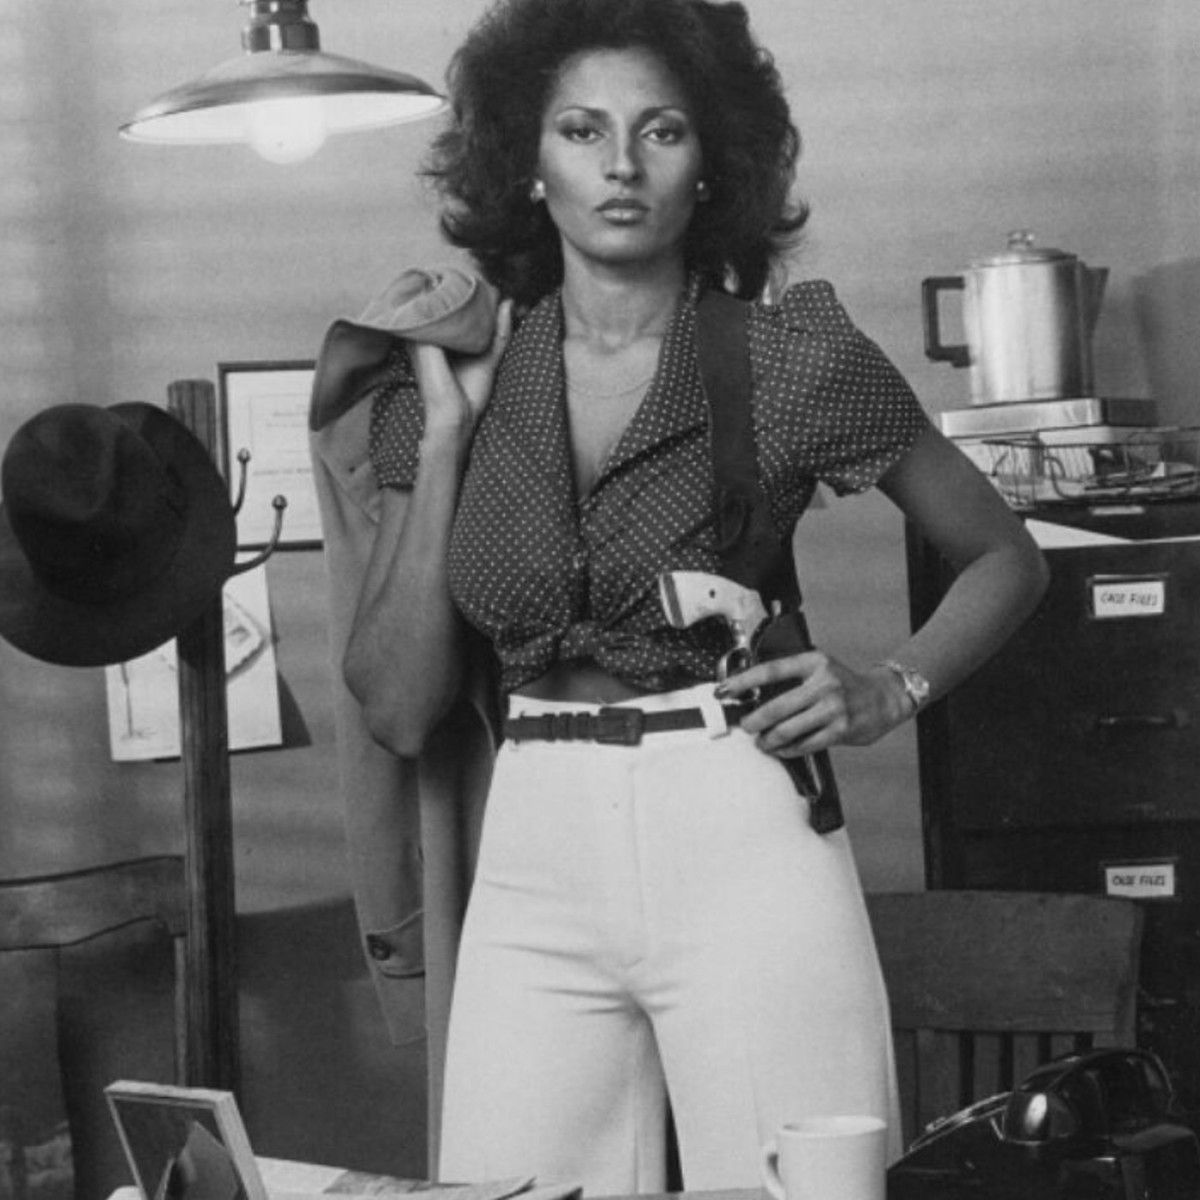 What Ever Happened to Pam Grier, the Original Foxy Brown?